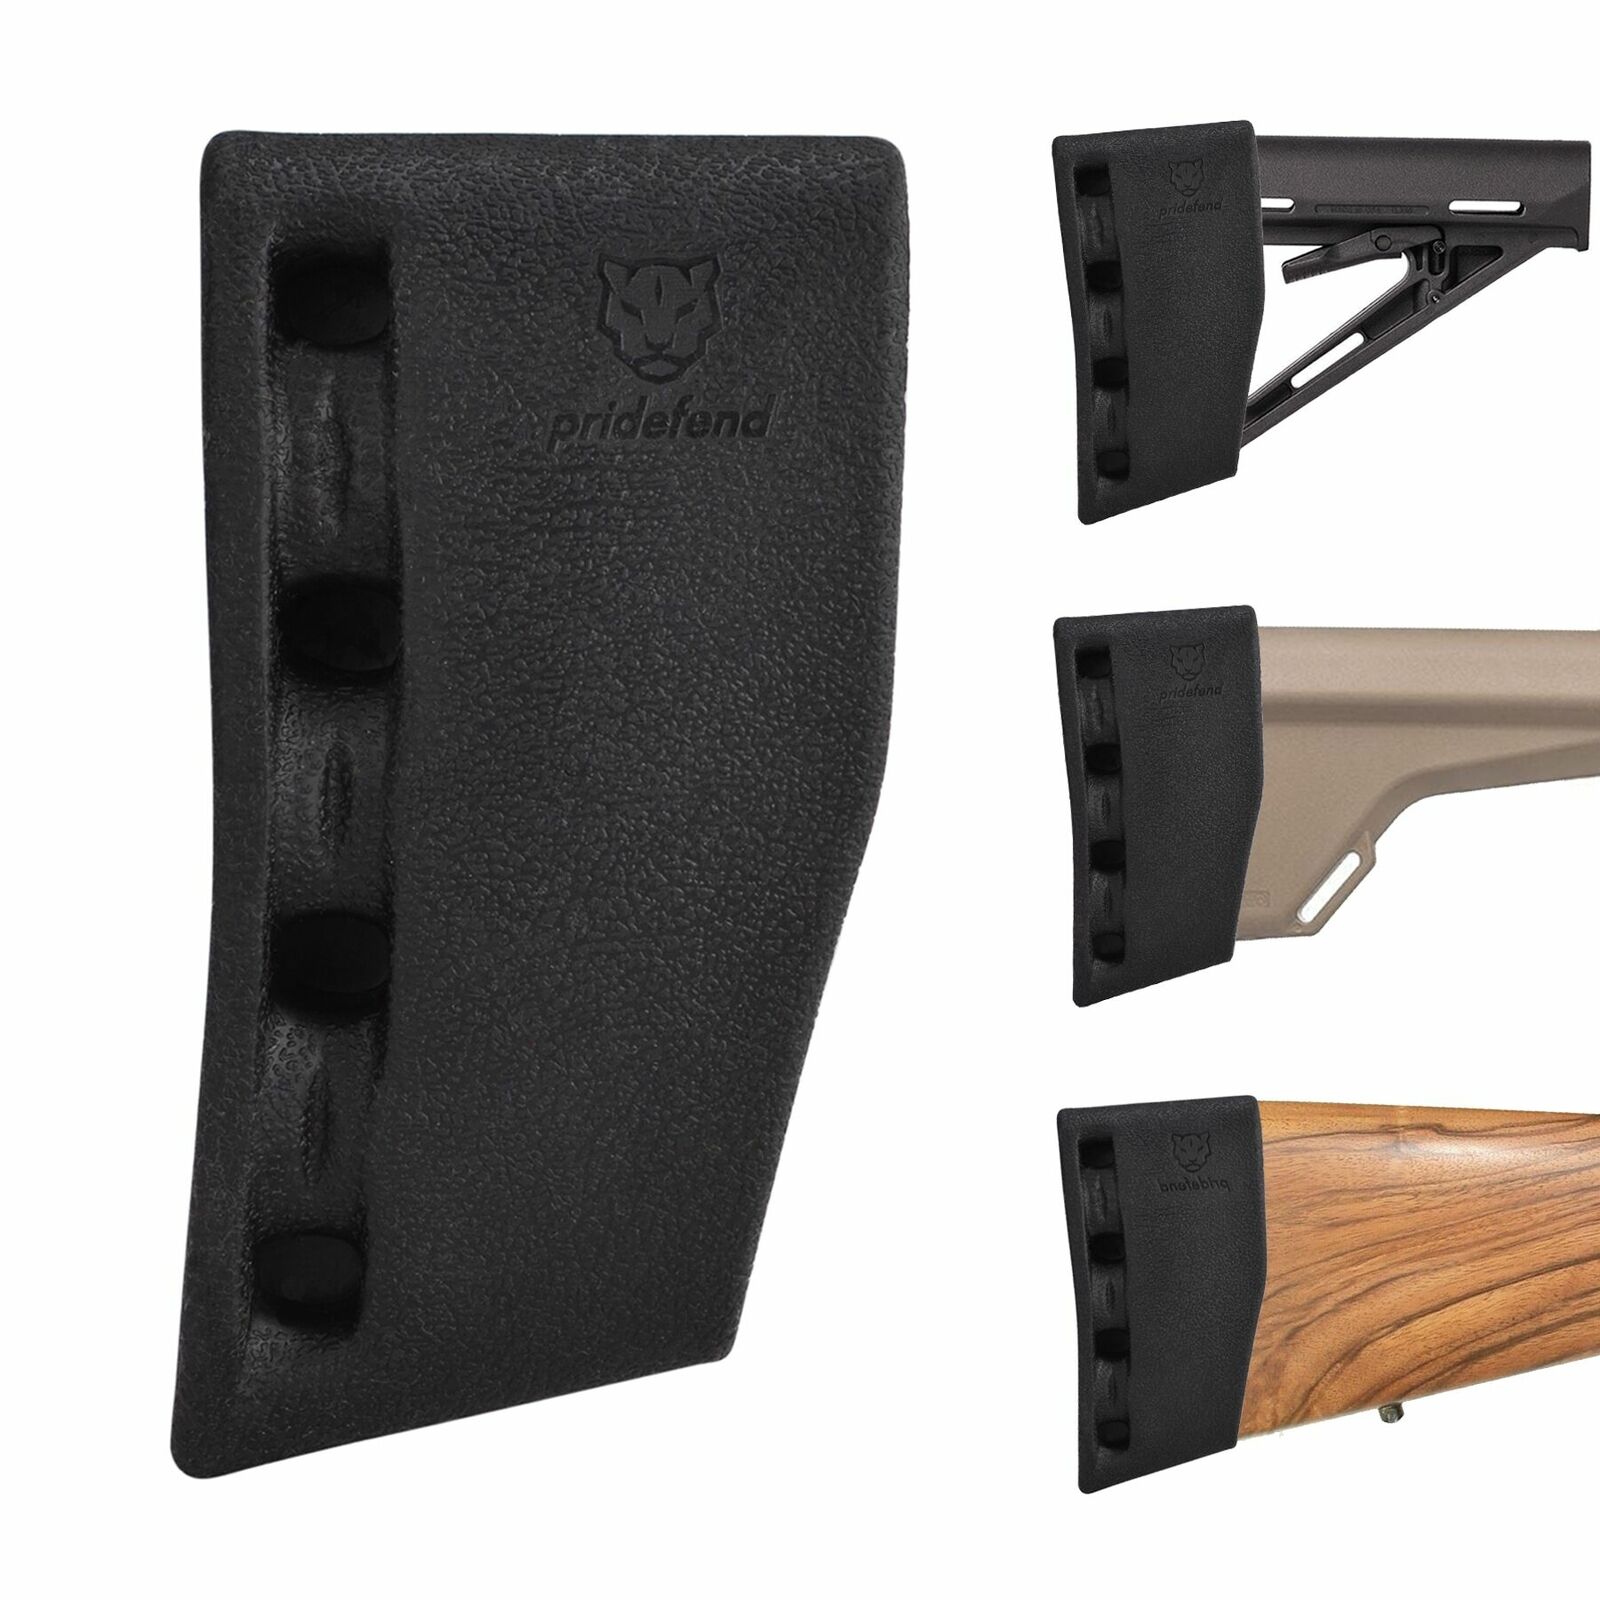 Synthetic Latex Rubber Slip-on Recoil Reducing Pad For Shotgun